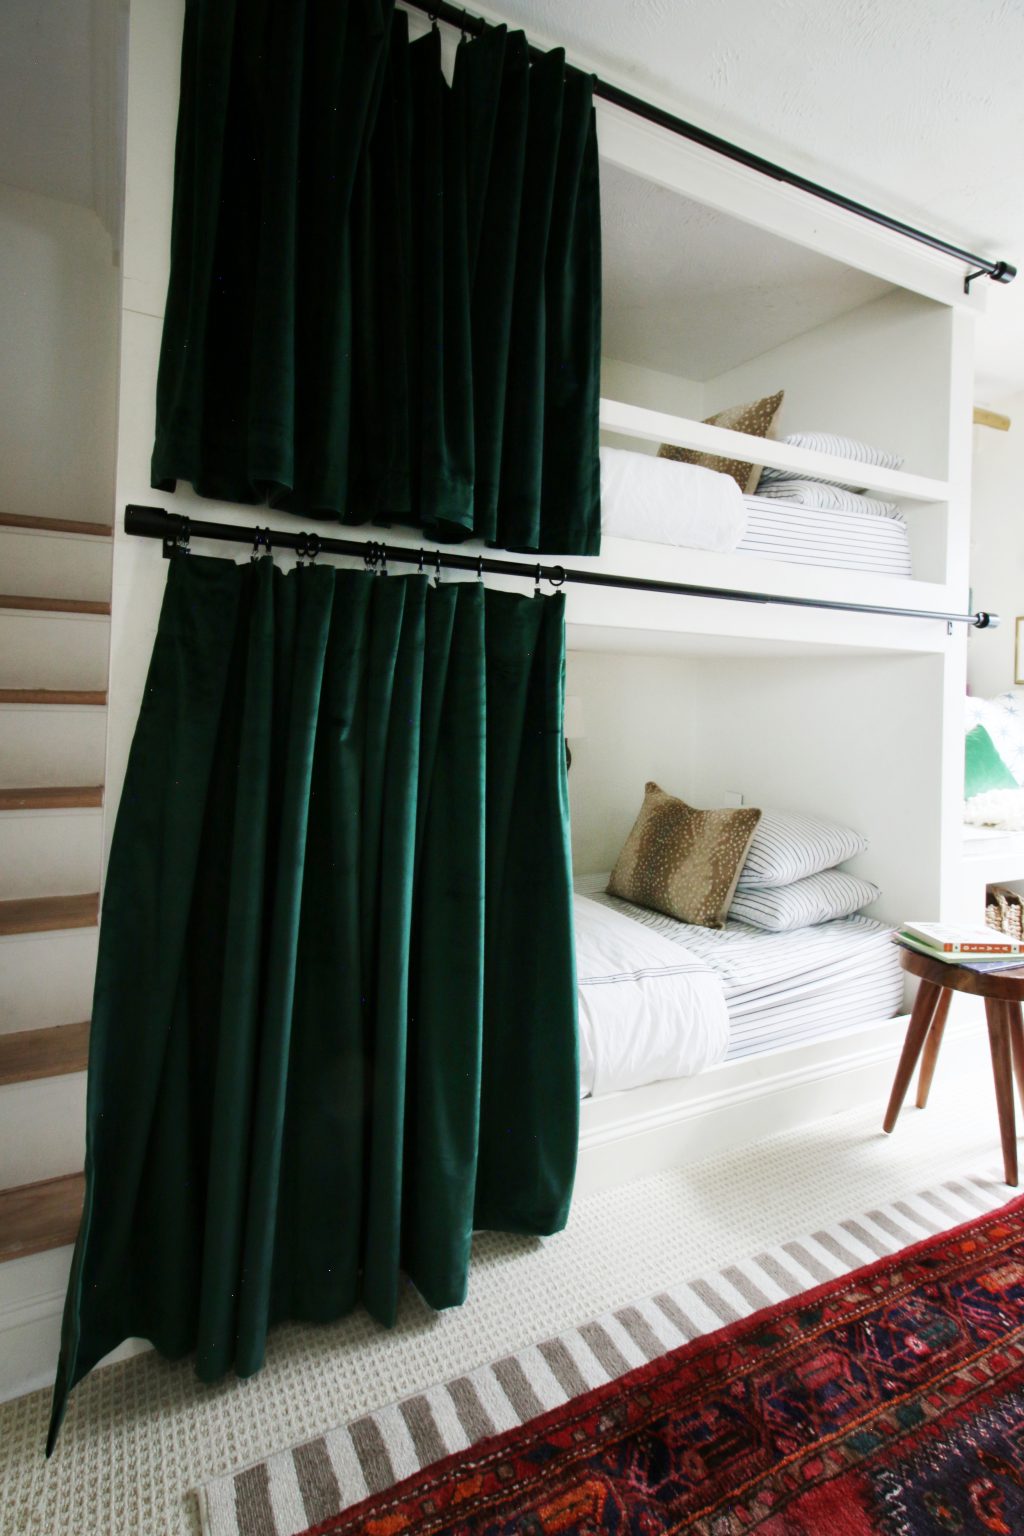 Hanging Curtains On Bunk Beds Chris, How To Make Bunk Bed Curtains